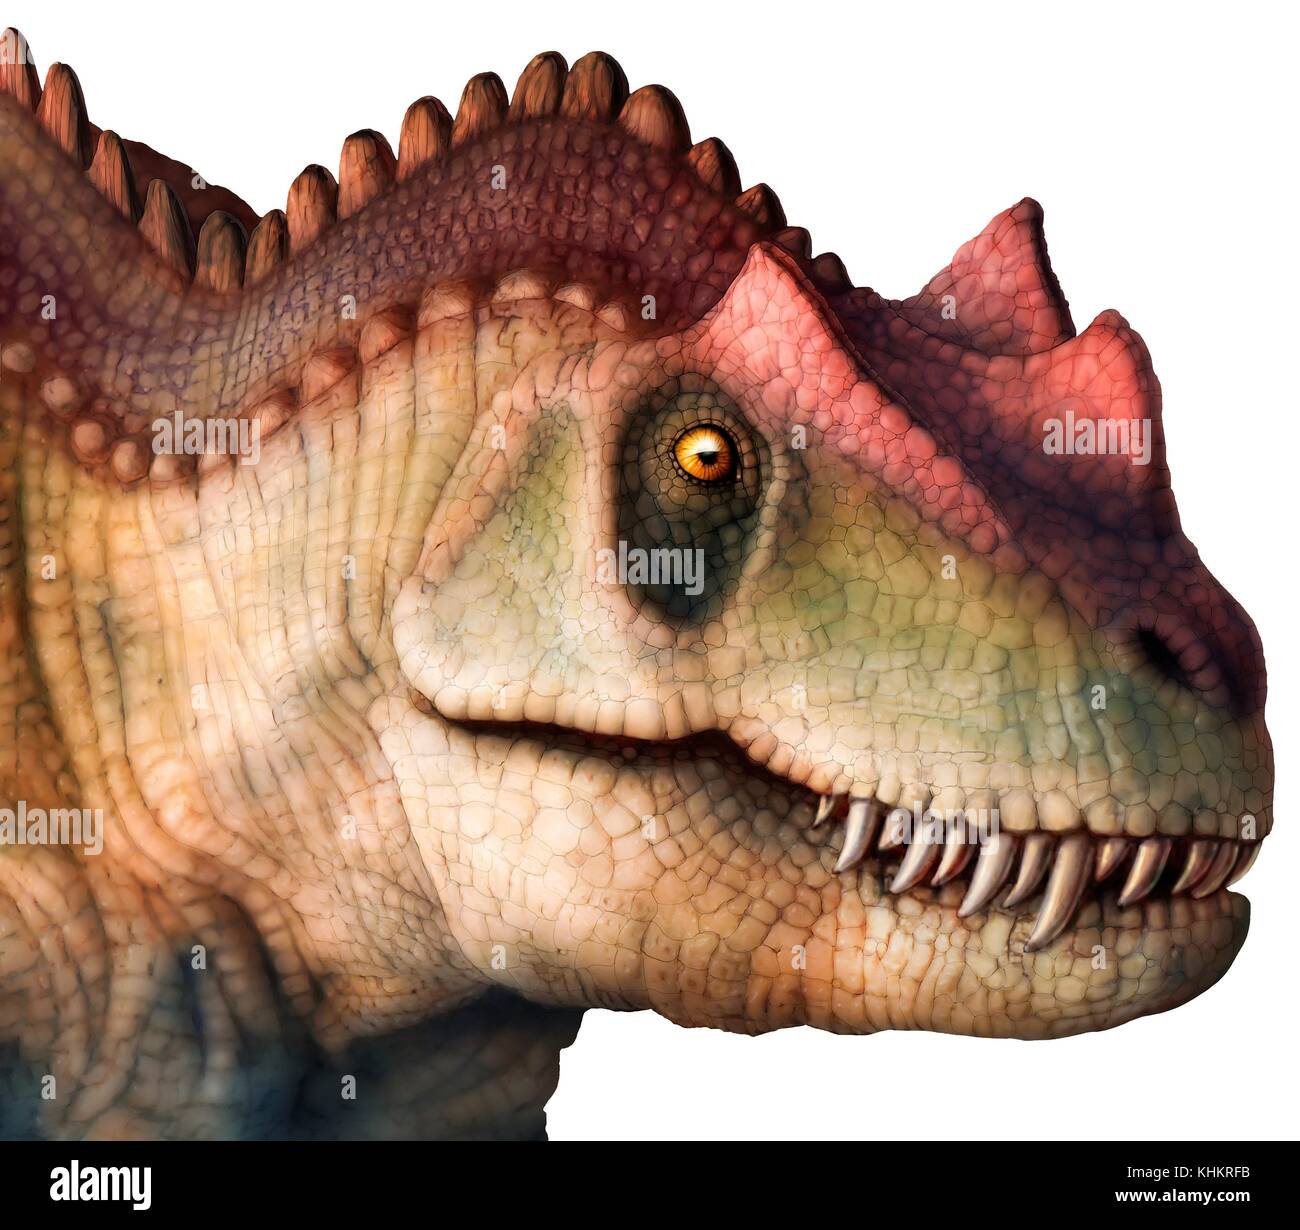 Illustration of the head of a Ceratosaurus sp. dinosaur. This large carnivorous theropod dinosaur lived during the Late Jurassic (153-148 million years ago) in what is now North America. It reached lengths of 6 to 7 metres. Stock Photo